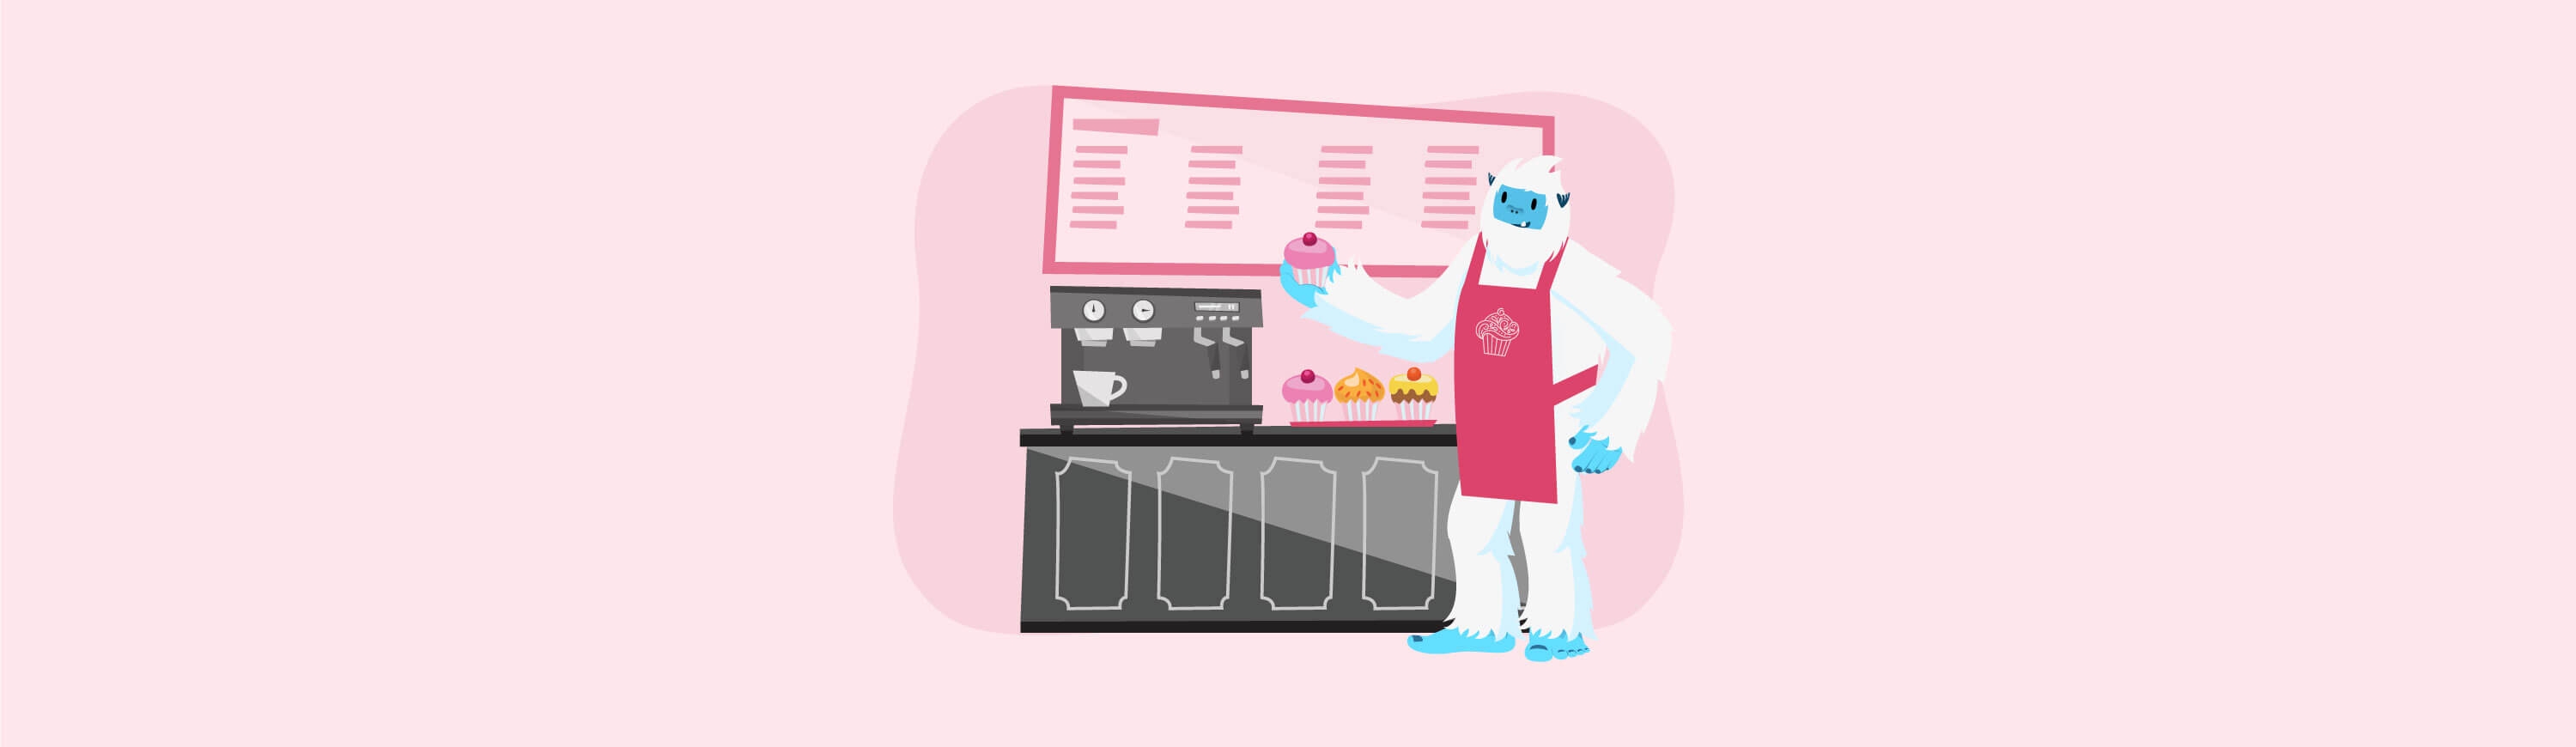 Illustration of Carl the yeti's working as a baker at a food stand, representing small business.